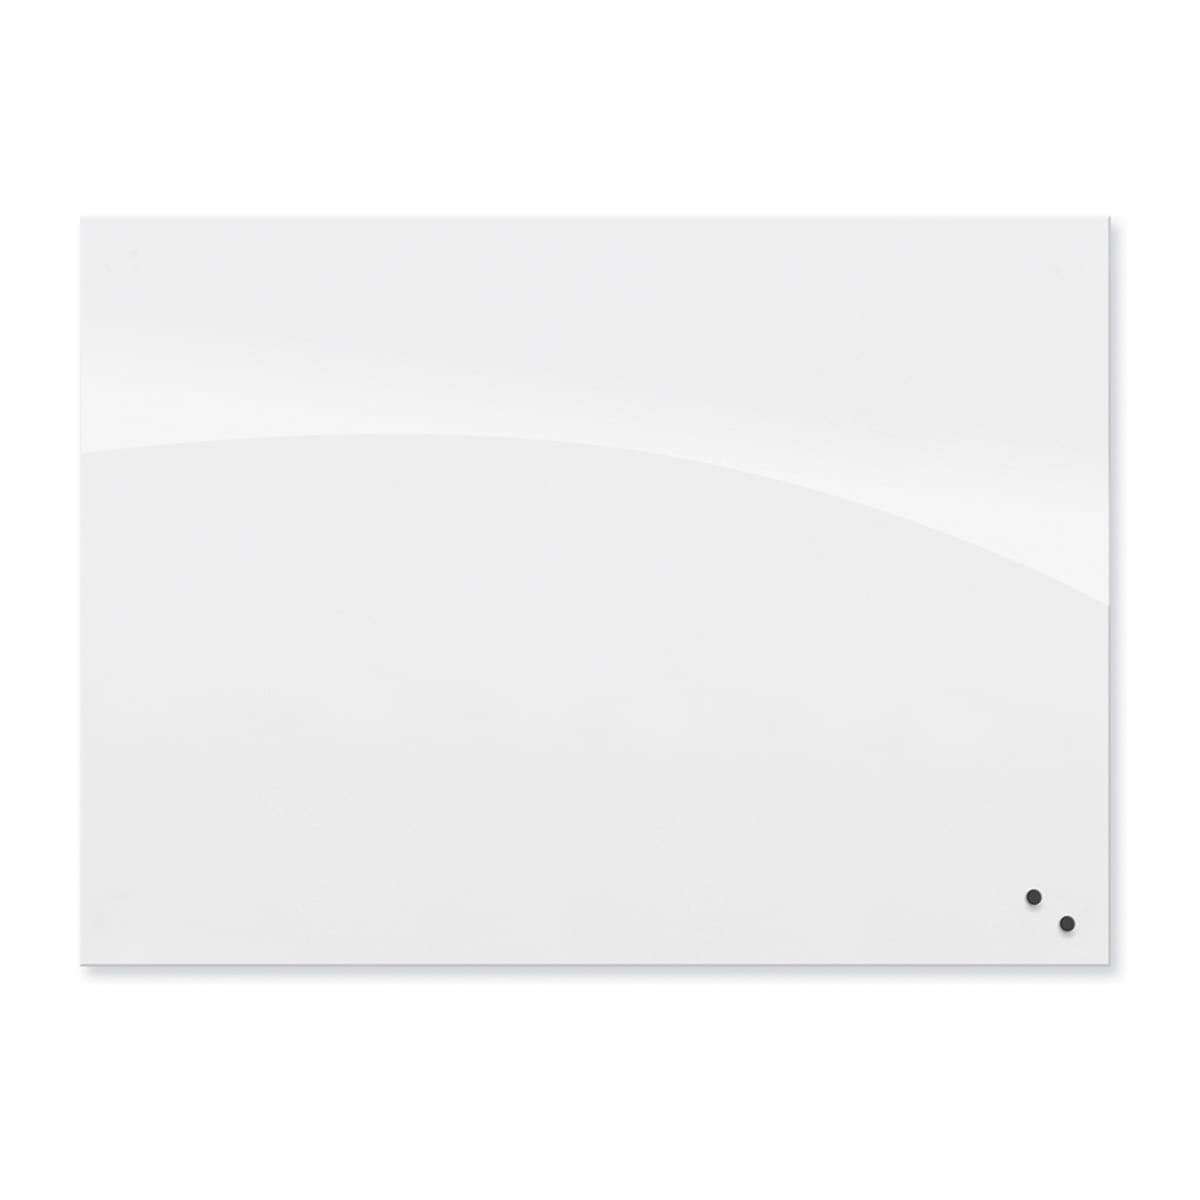 Mooreco InSight Low Iron Magnetic Glass Board - Gloss White - 4'H x 8'W (Mooreco 83910) - SchoolOutlet